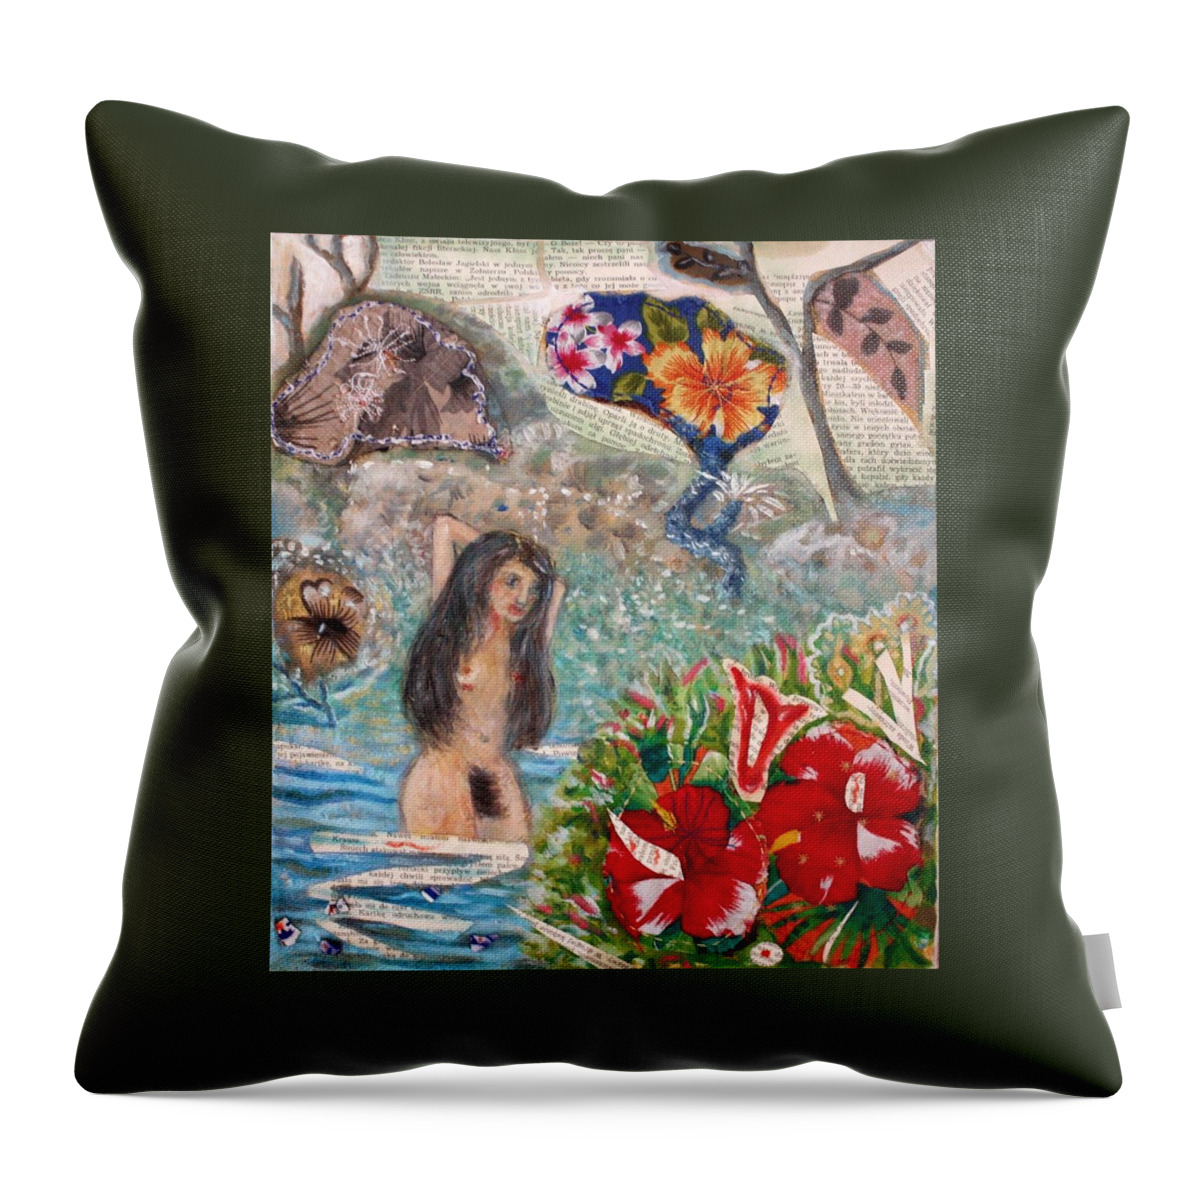 Fabric Throw Pillow featuring the painting Collage by Elzbieta Goszczycka